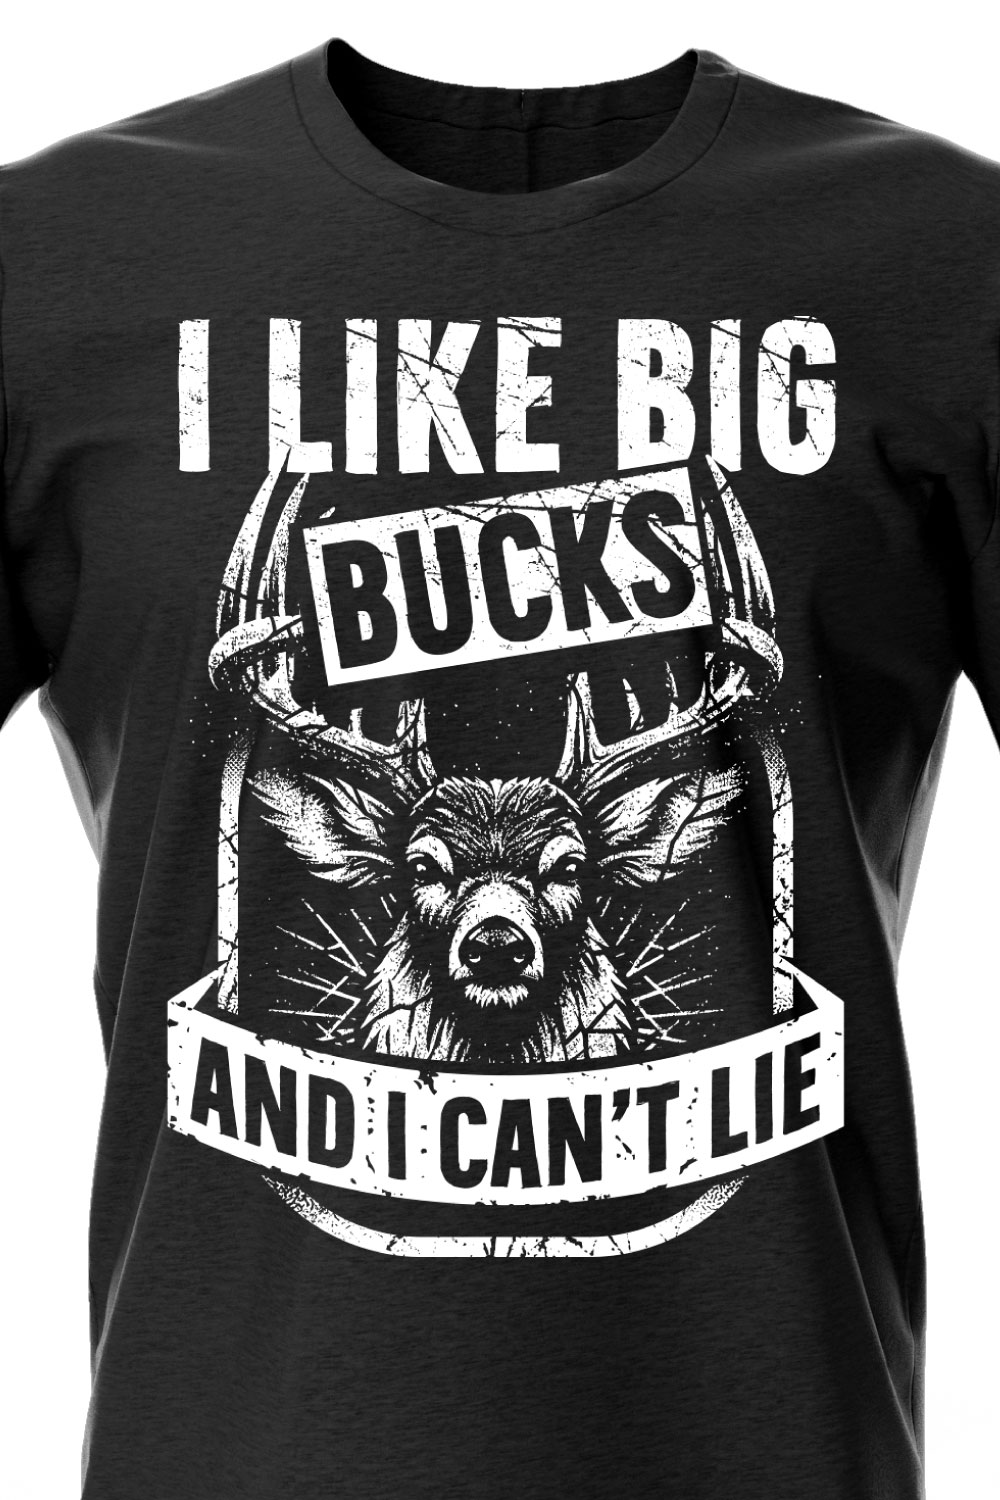 The best selling hunting t shirt designs pinterest preview image.